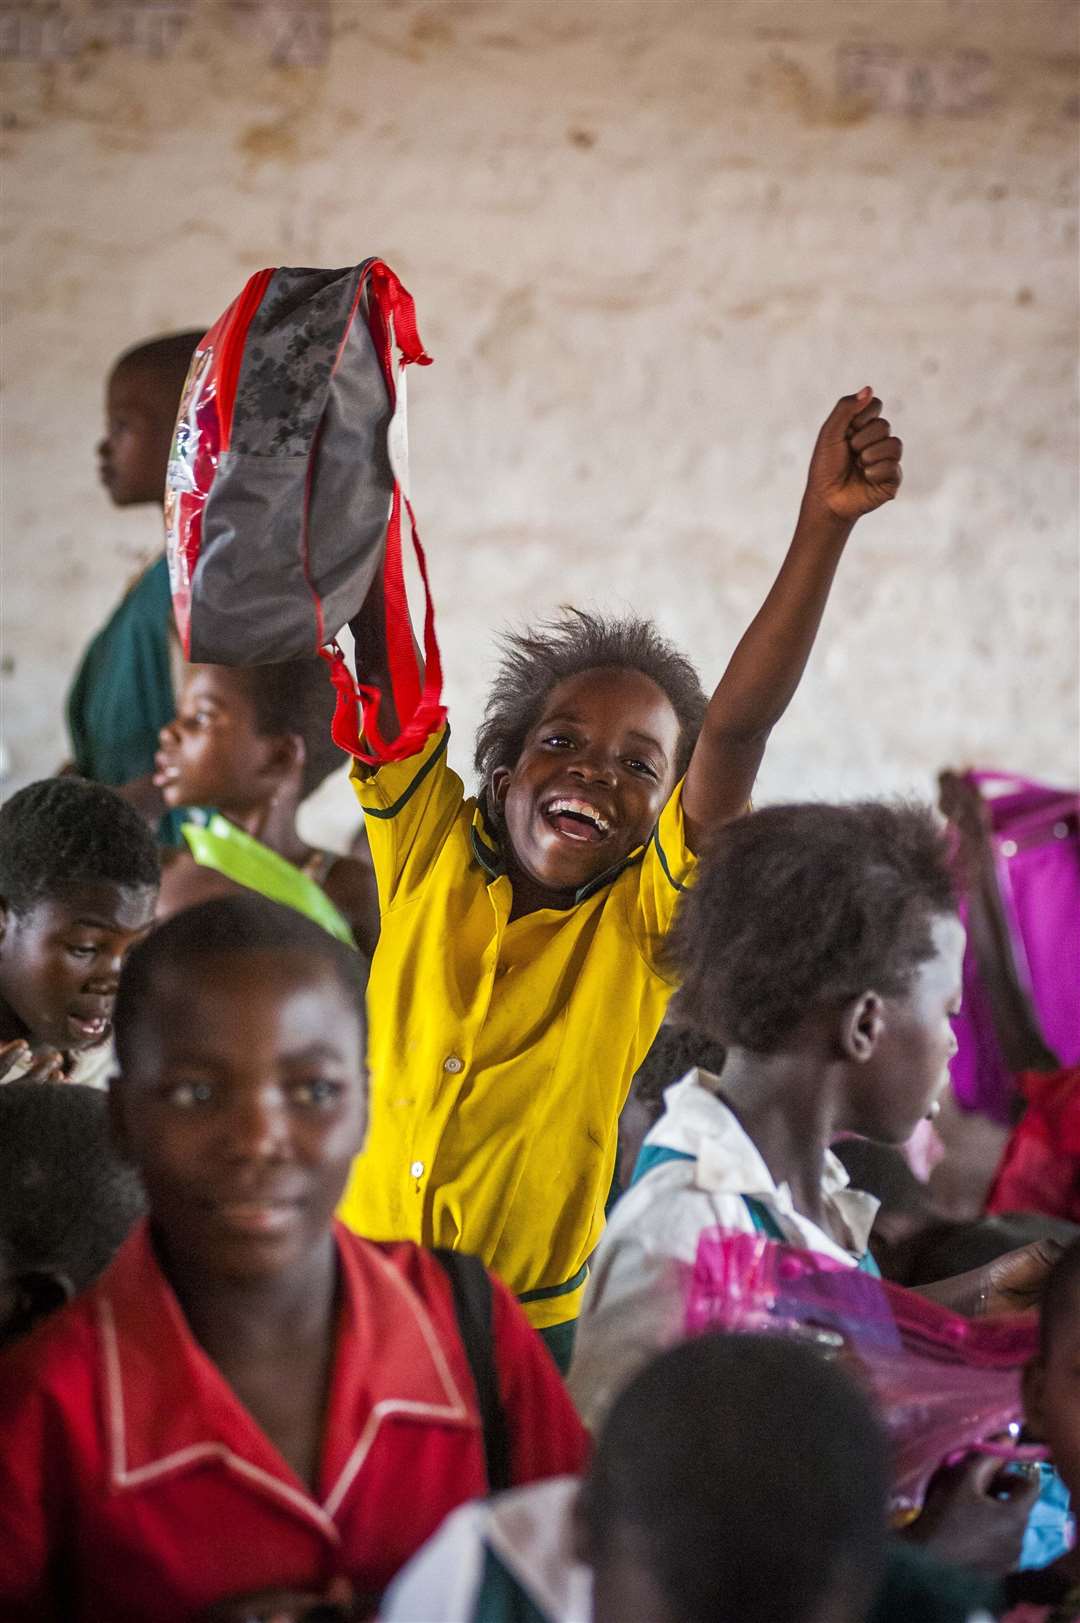 A child at a school in Malawi holding a bag from the Mary’s Meals Backpack Project.